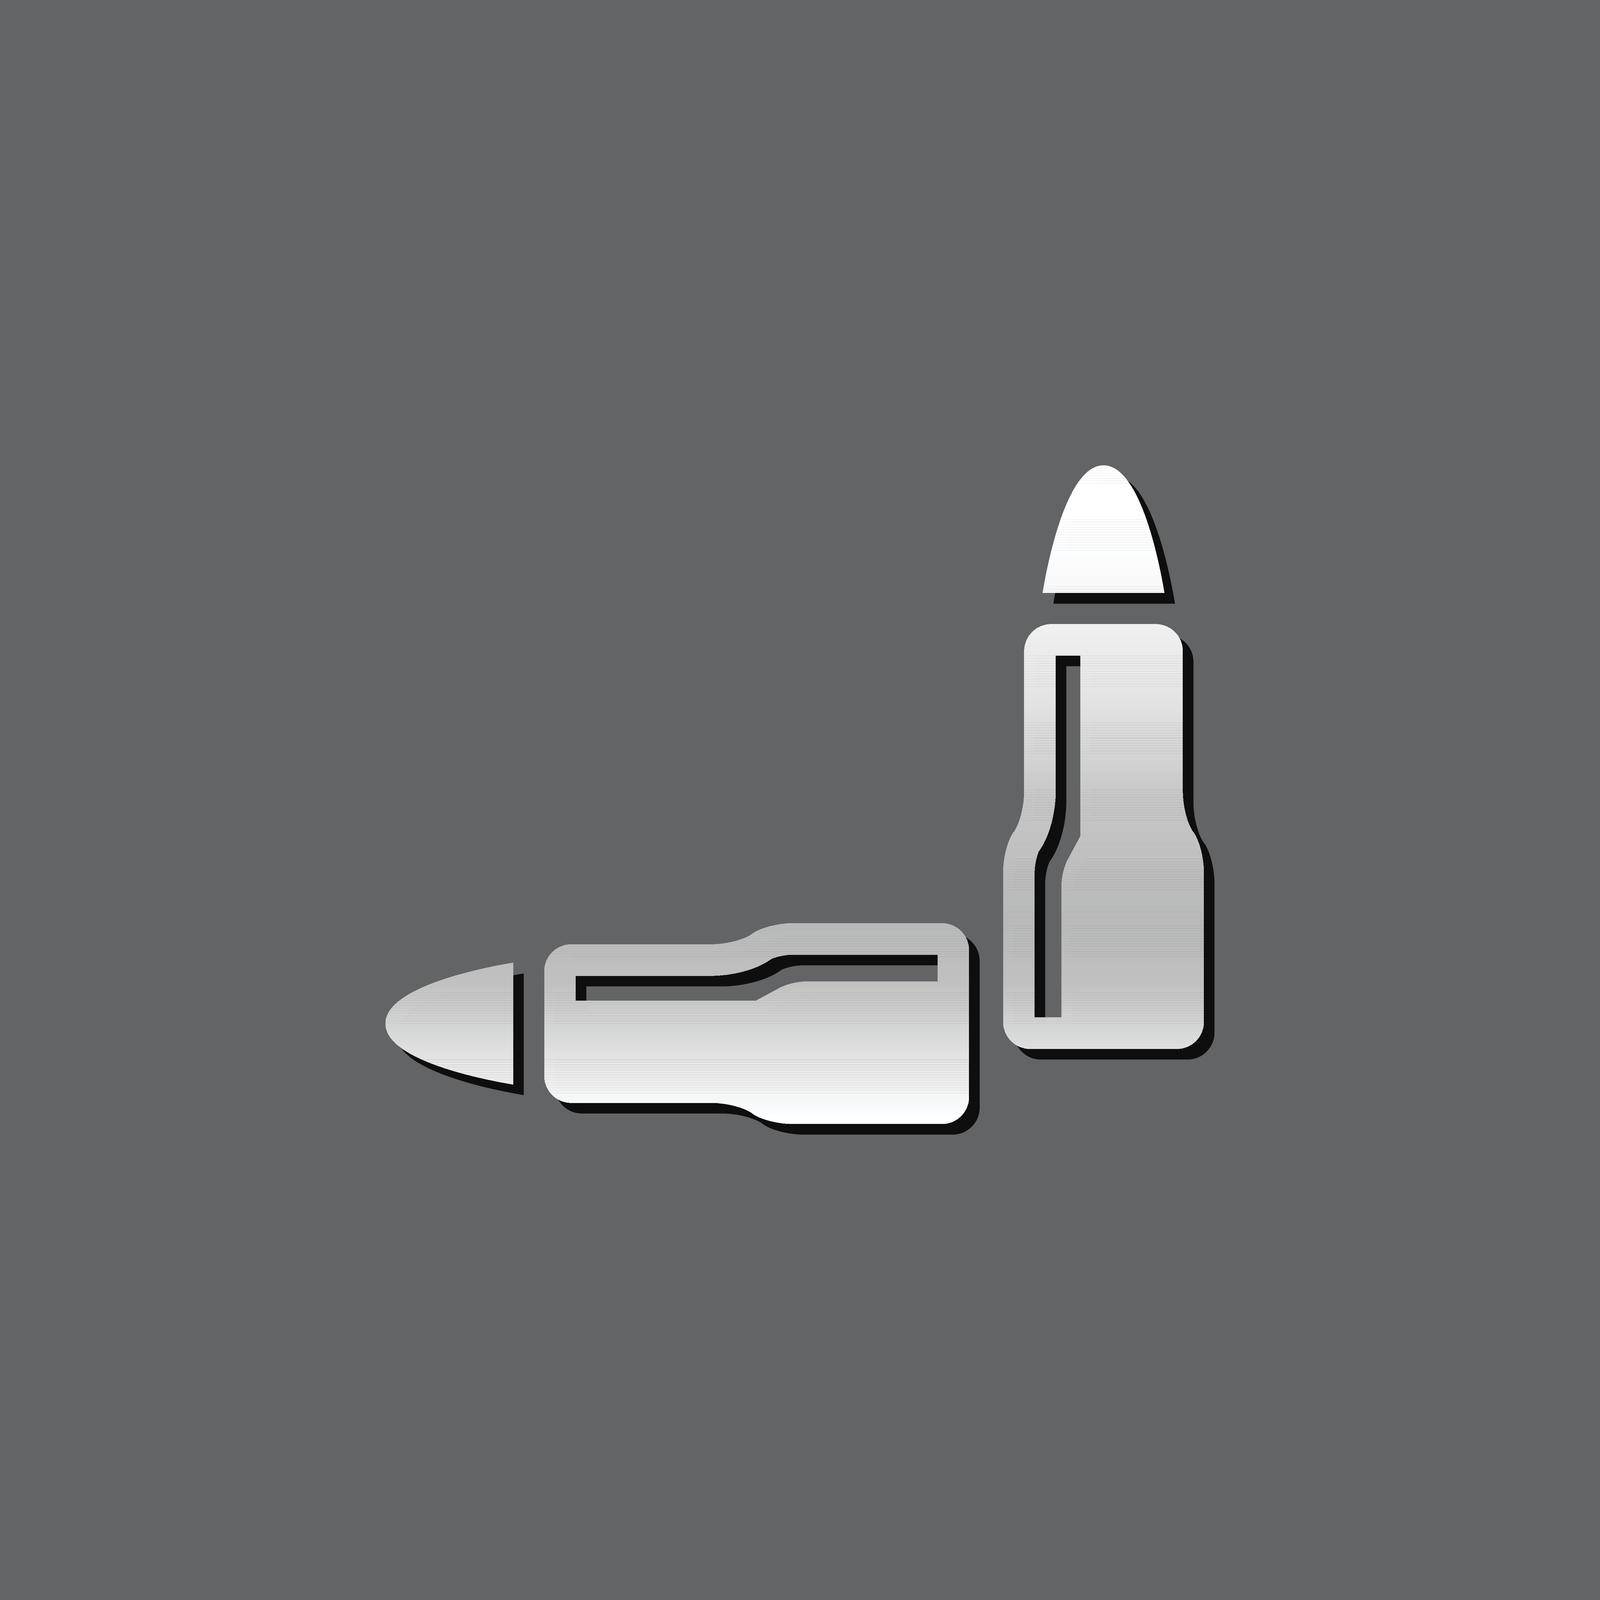 Bullets icon in metallic grey color style. Ammunition gun weapon